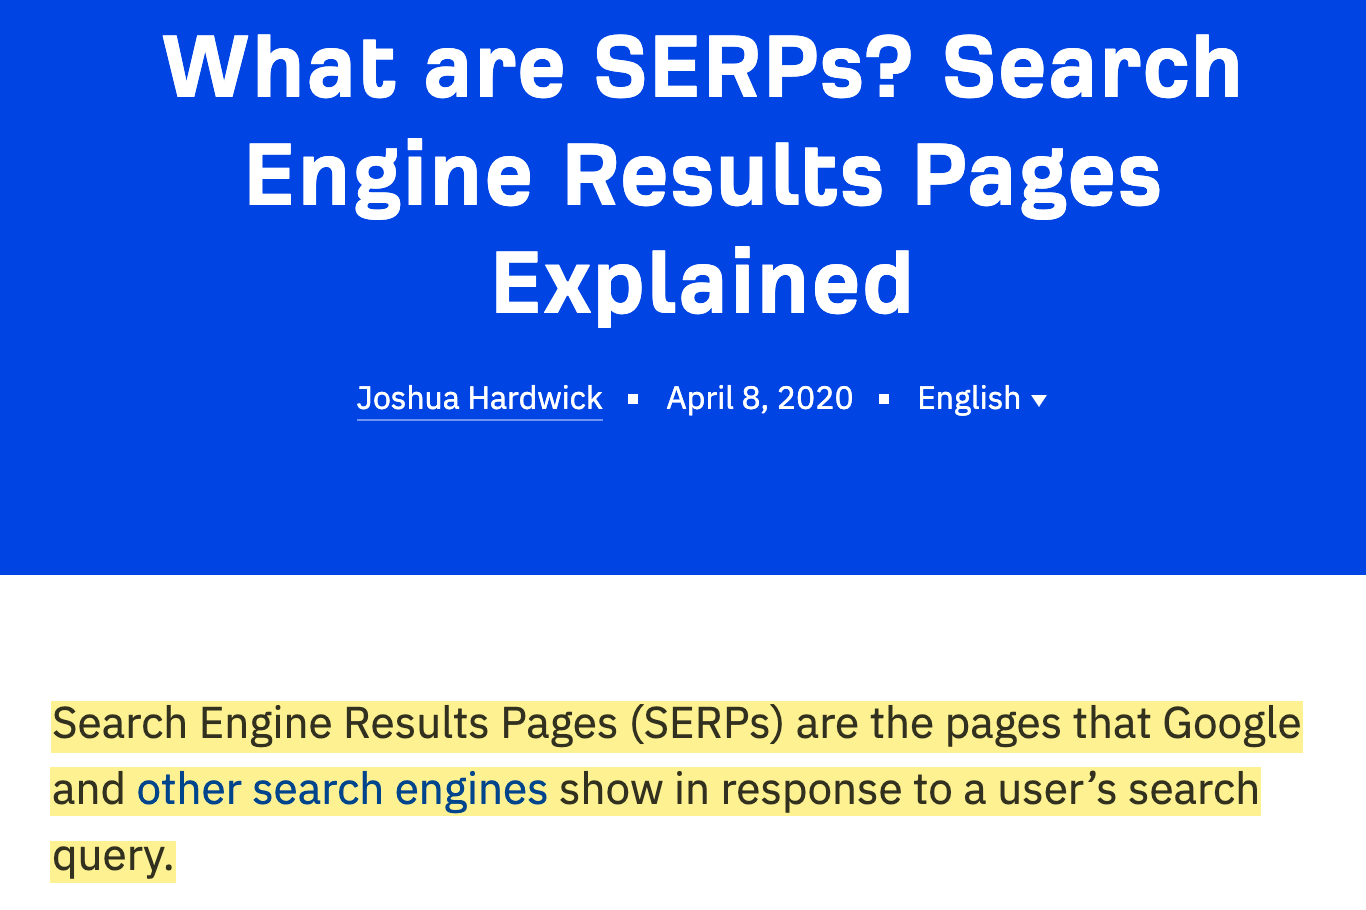 Ahrefs blog post on "what are SERPs"